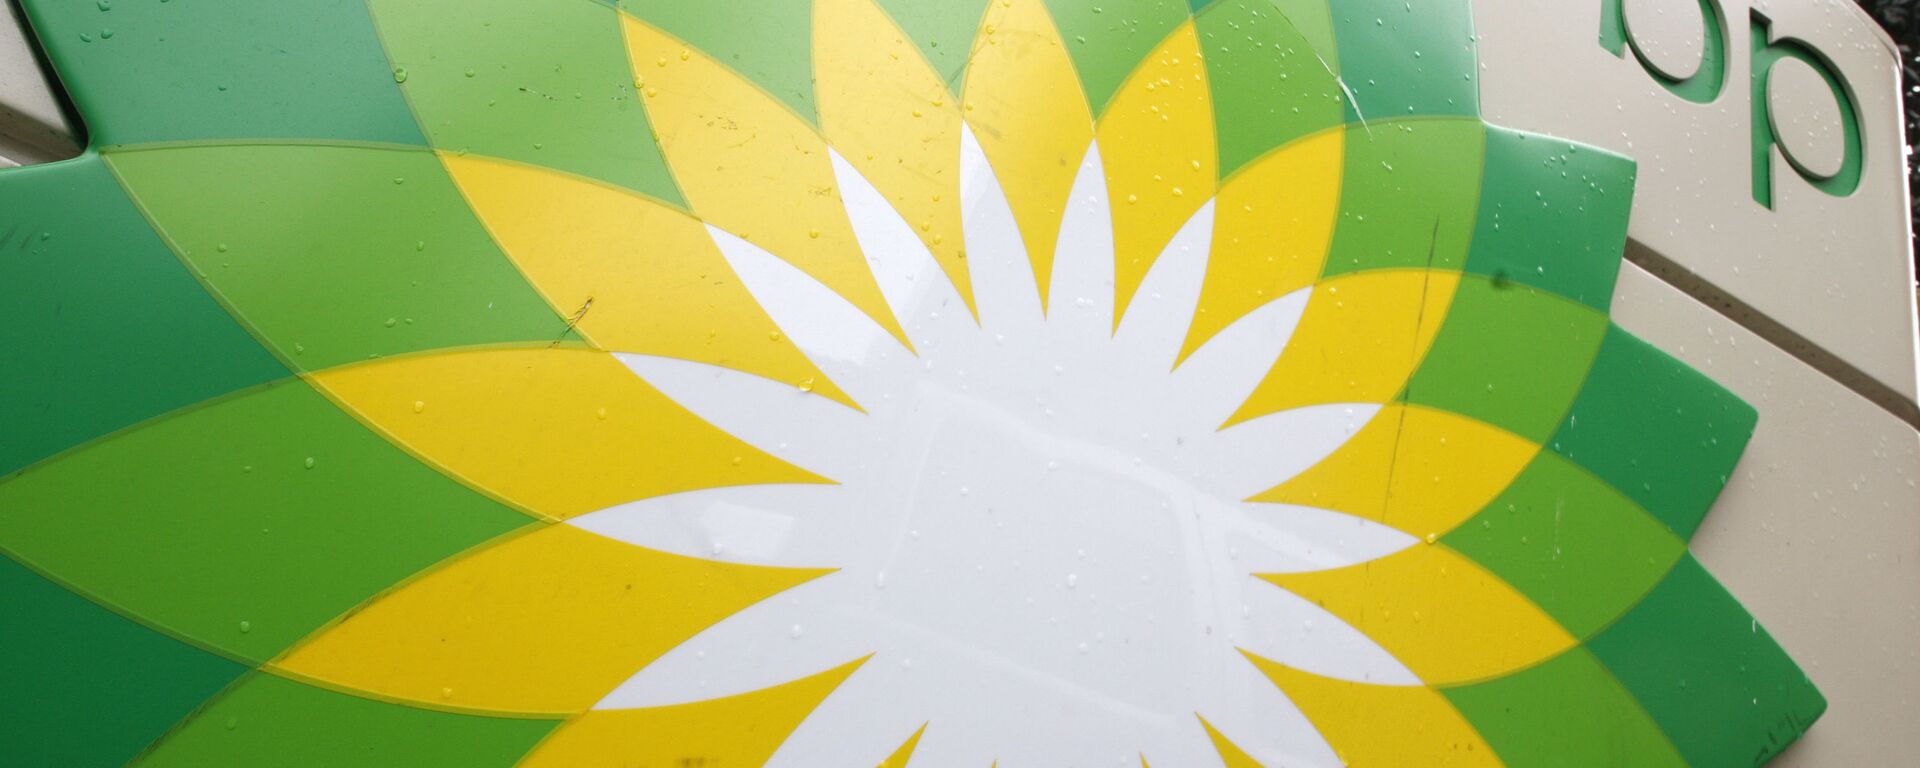 FILE - In this Oct. 25, 2007 file photo, the BP (British Petroleum) logo is seen at a gas station in Washington. BP will spend $7 billion to buy exploration rights to areas in the Gulf of Mexico, offshore Brazil and Canada owned by Devon Energy - Sputnik International, 1920, 23.09.2021